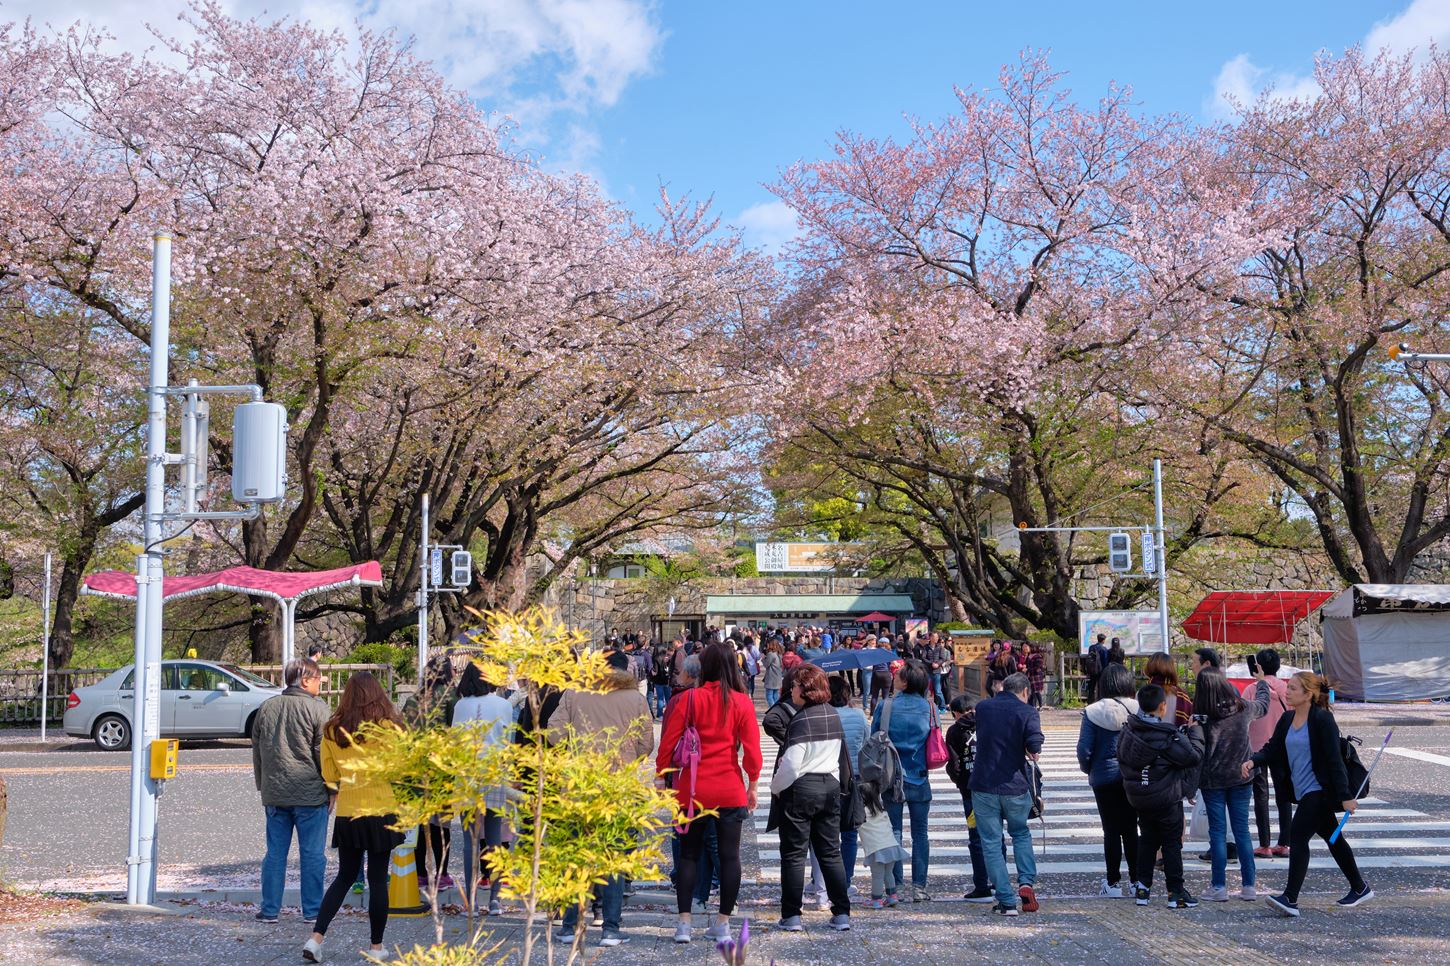 Sightseeing scenery that simply shows the weather in Nagoya in April3